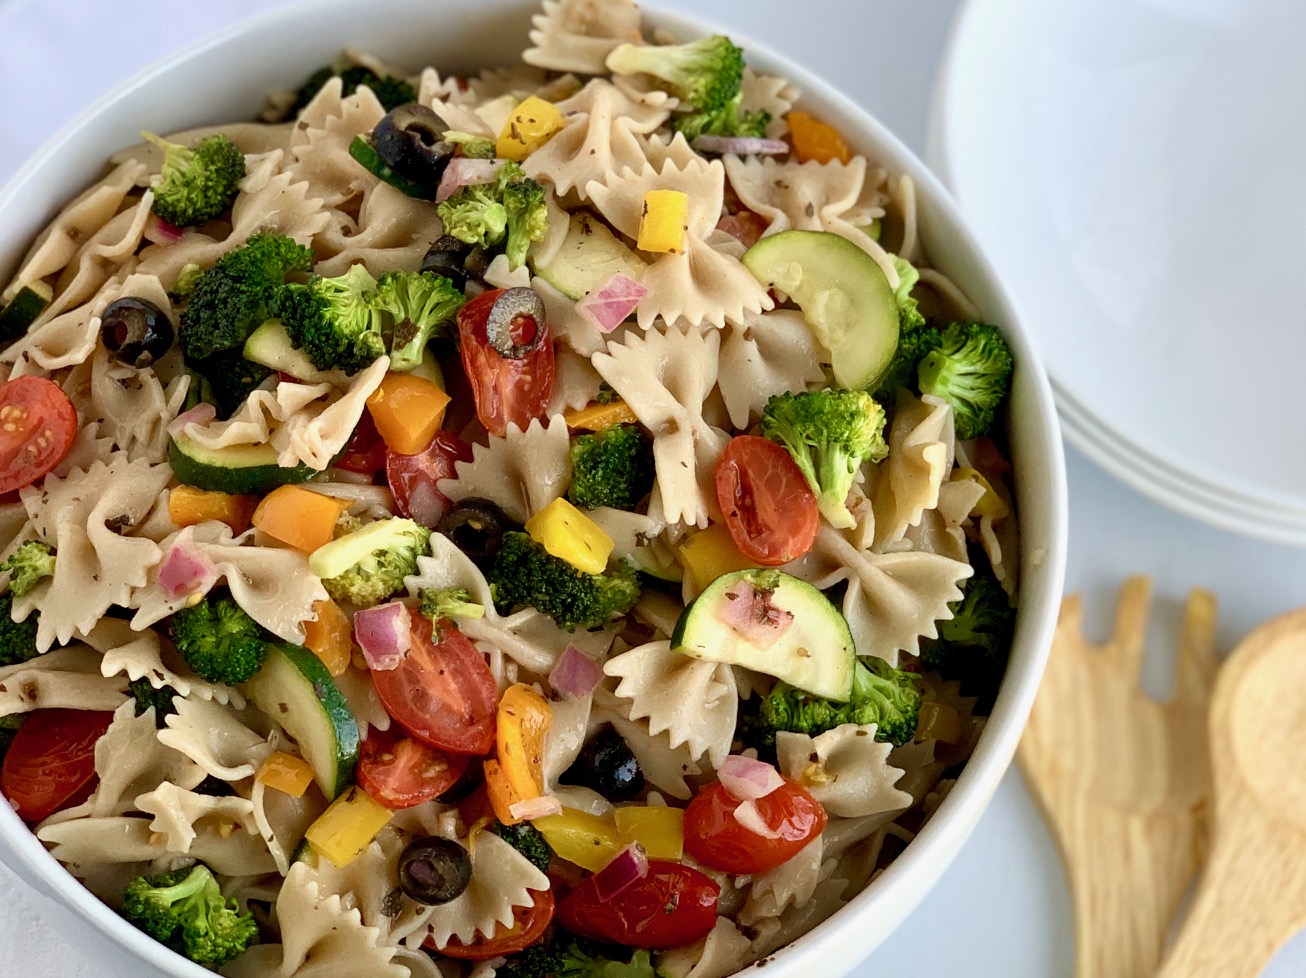 A serving bowl filled with delicious veggie pasta salad.